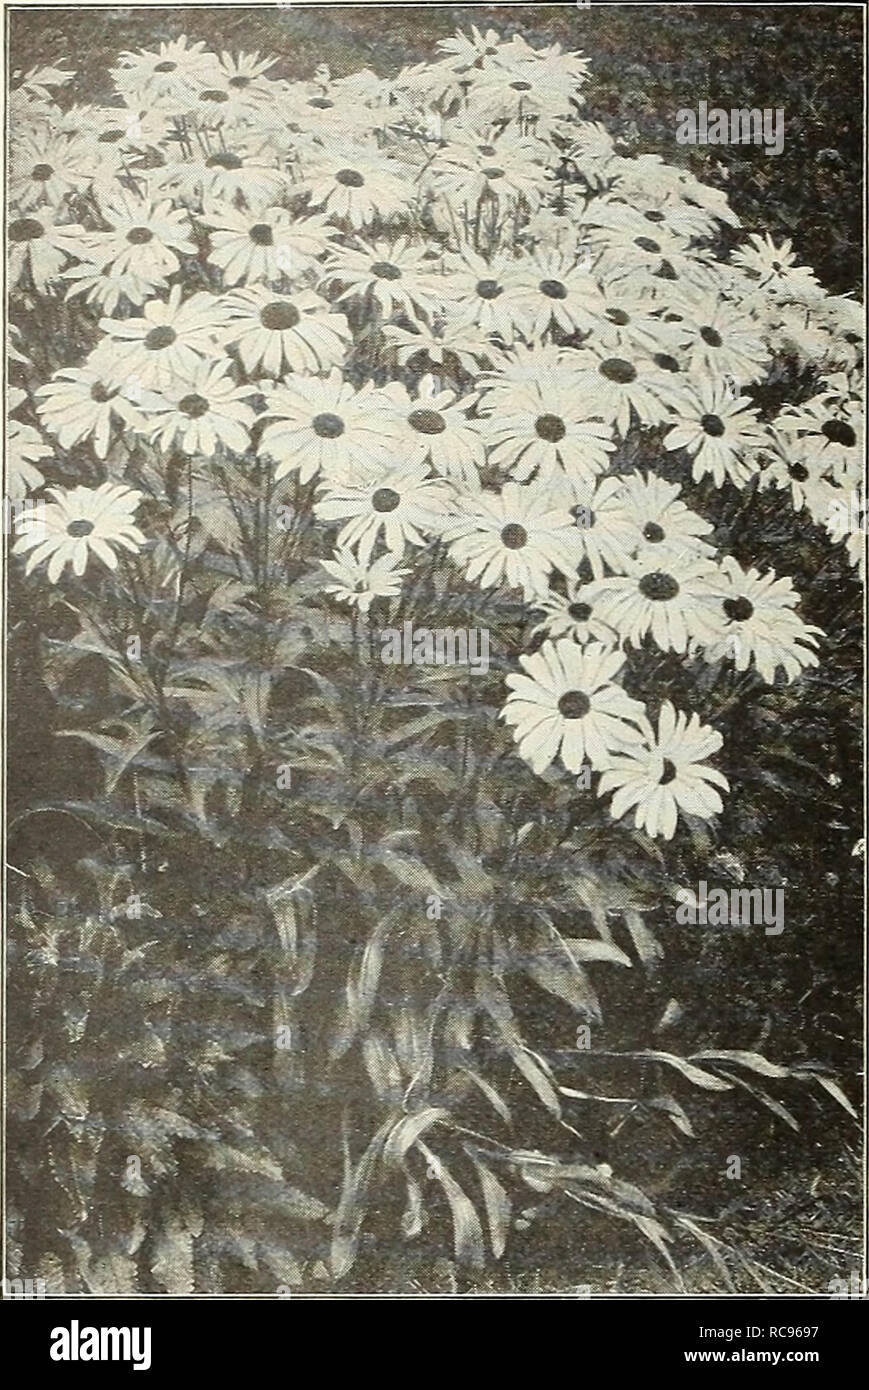 . Dreer's garden book 1927. Seeds Catalogs; Nursery stock Catalogs; Gardening Equipment and supplies Catalogs; Flowers Seeds Catalogs; Vegetables Seeds Catalogs; Fruit Seeds Catalogs. 174 /fllIAima!S!IJalf)&amp;«iiM?^ik^gffl™g^. Chrysaxthe-Miim, Shasta Daisy Alaska. Offered on page 176 Calimeris (star wort) Incisa. An attractive, free flowering plant; grows 12 to 18 inches high, producing from July to September daisy-like, pale, laven- der flowers, with yellow centre. 25 cts. each; $2,50 per doz. Callirhoe (Poppy Maiiow) Involucrata. An elegant trailing plant, with finely divided foliage and l Stock Photo